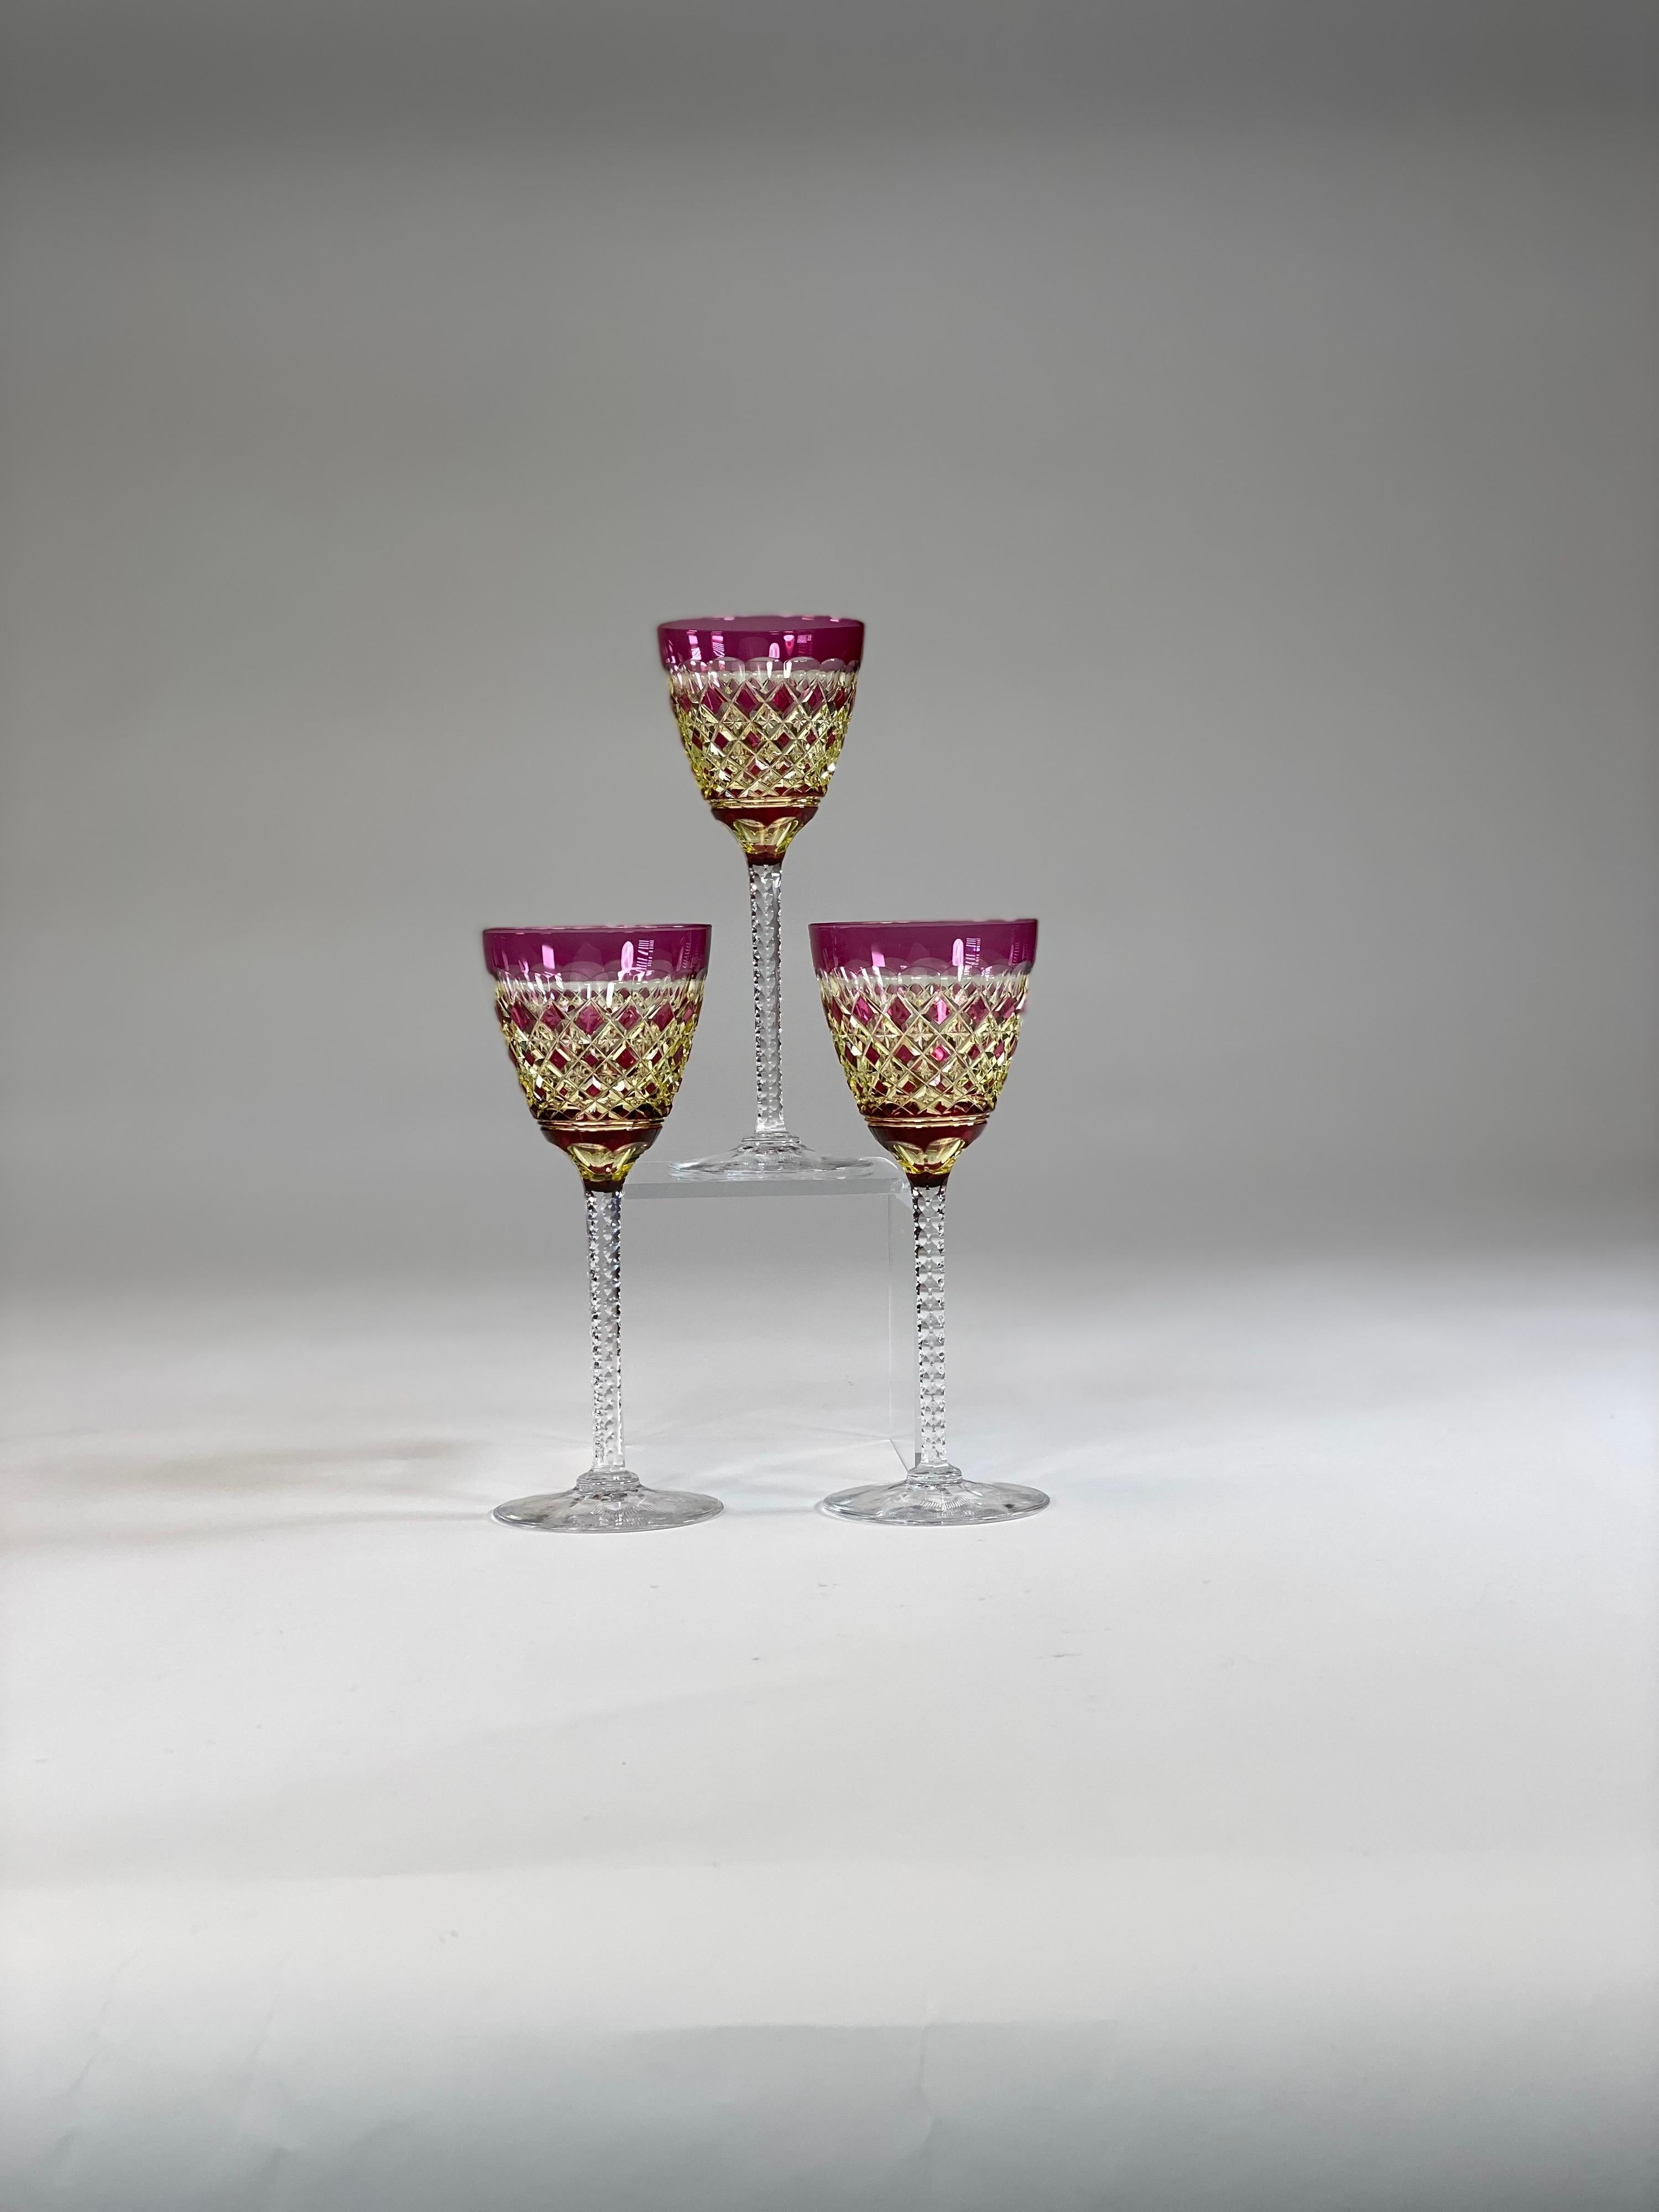 Crystal Set of 10 Val Saint Lambert Amethyst Overlay Cut to Chartreuse Goblets